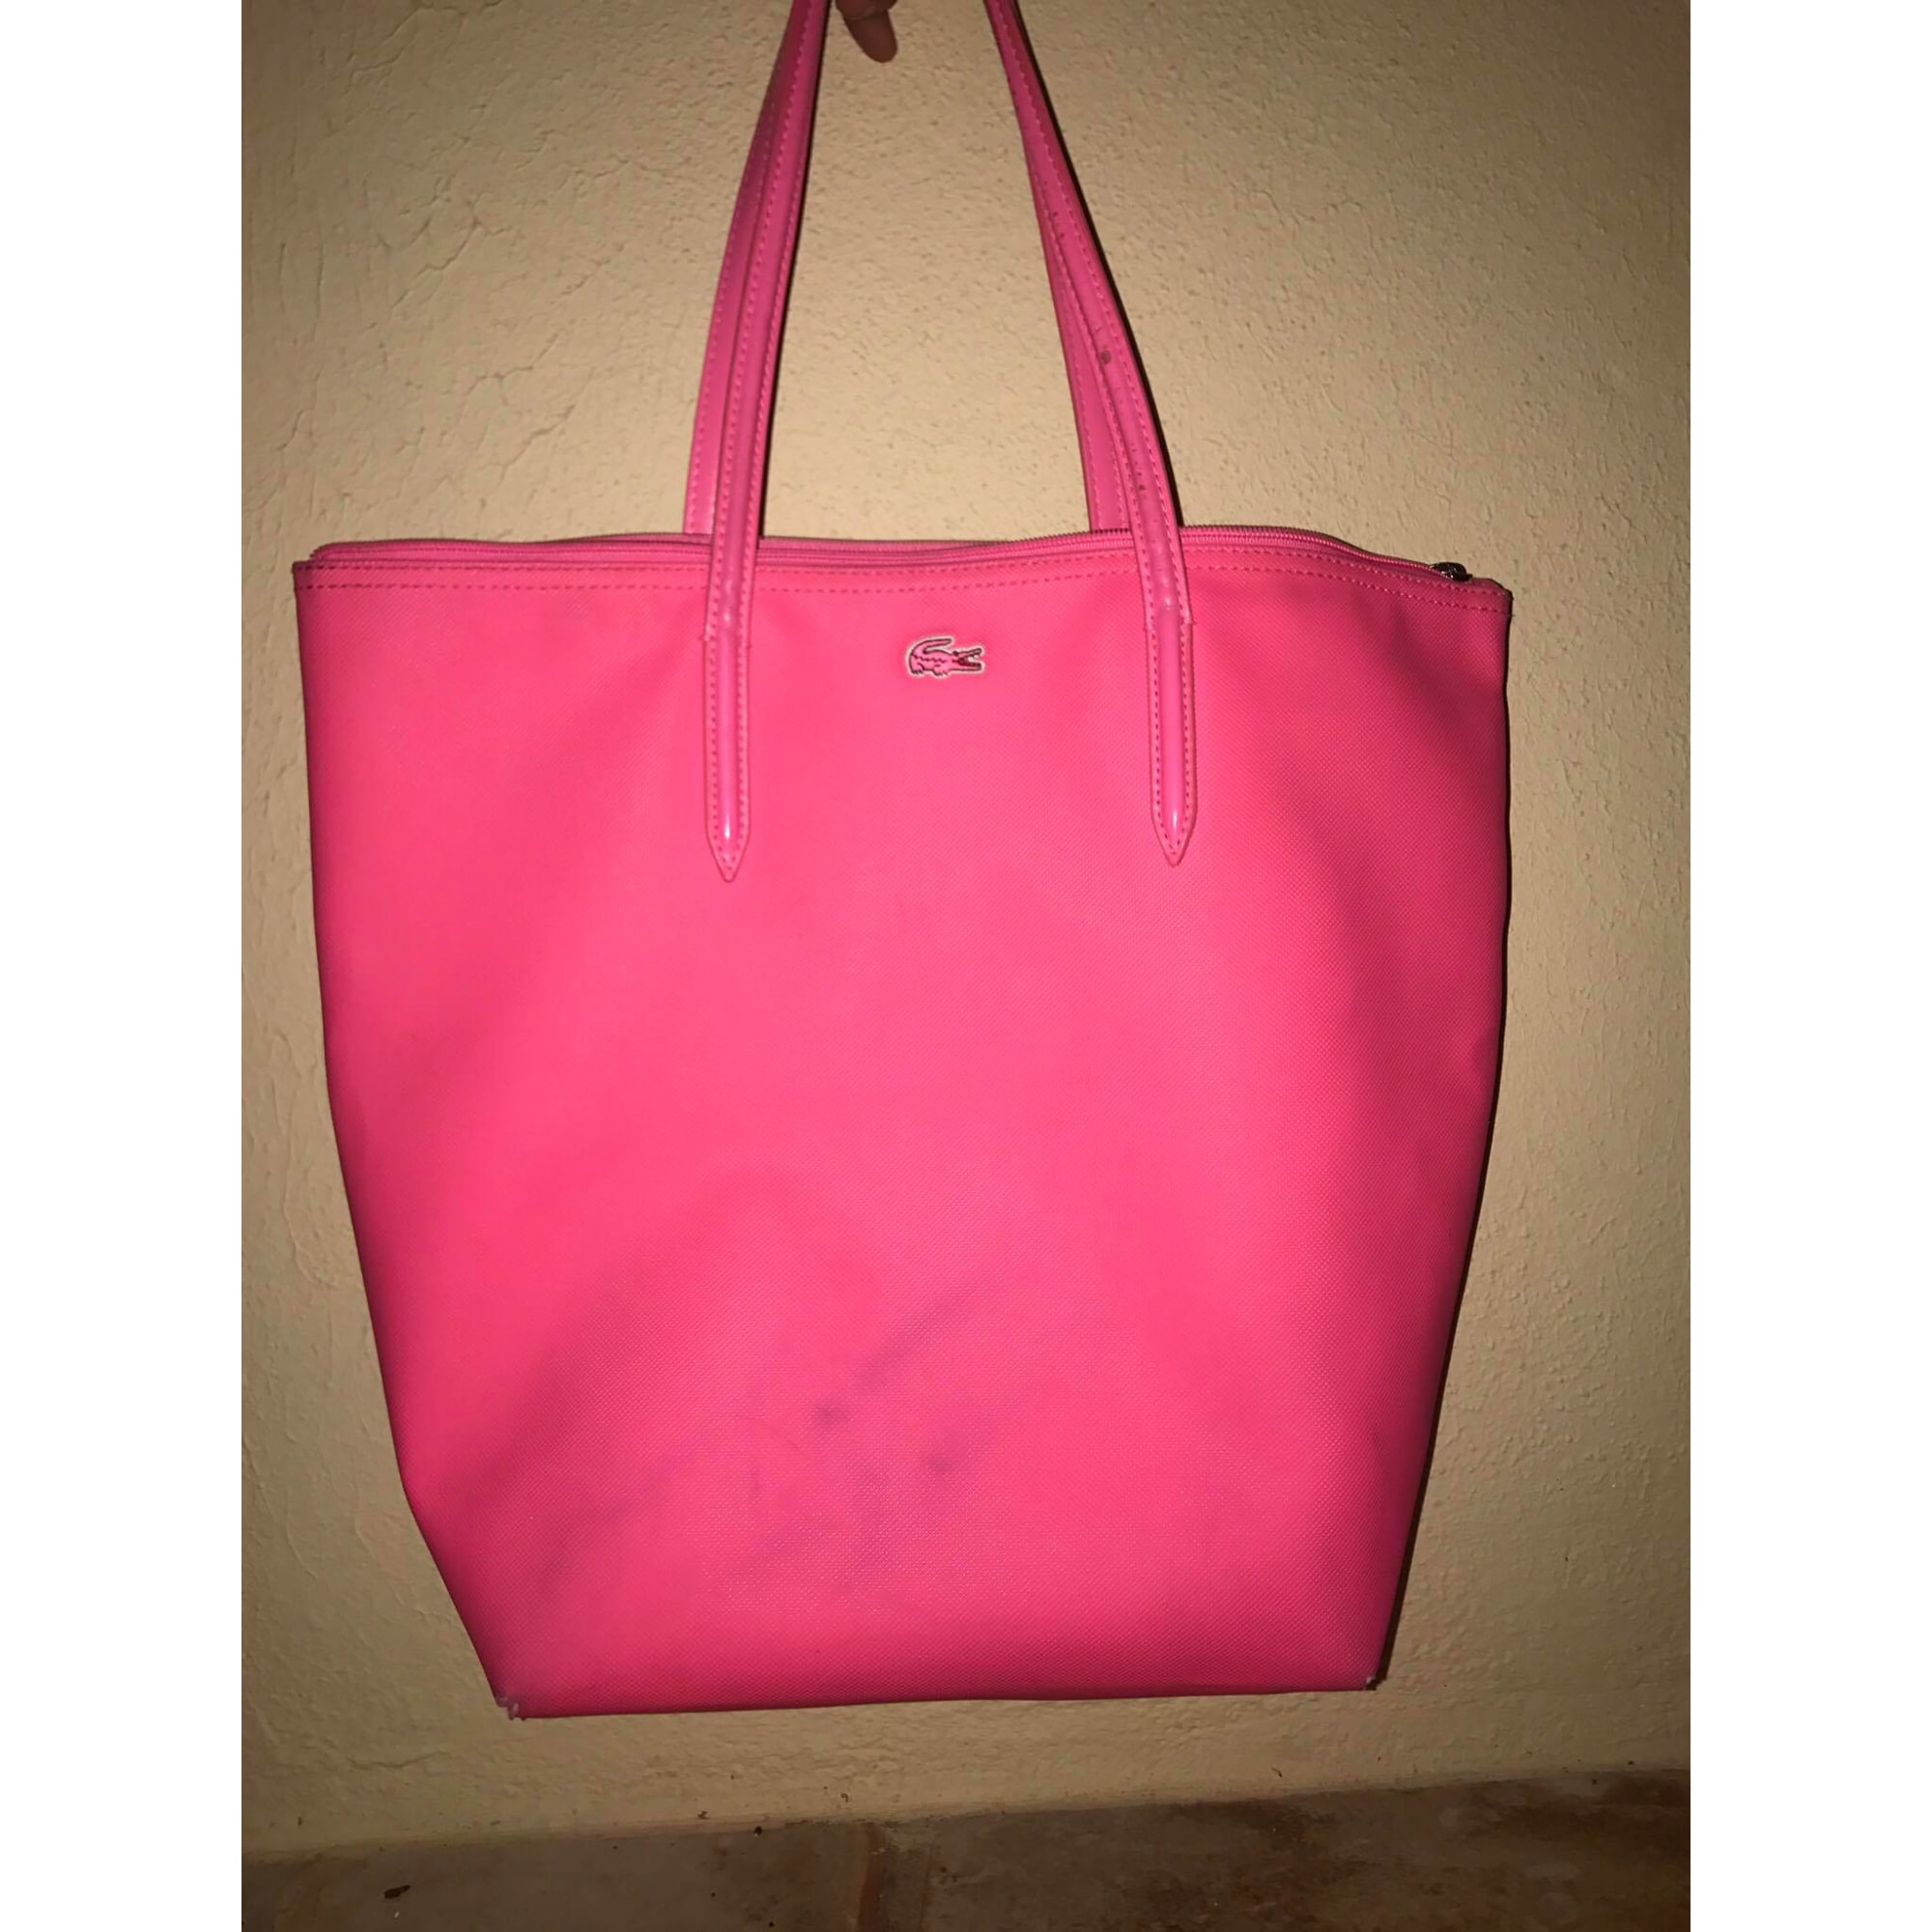 lacoste pink bag